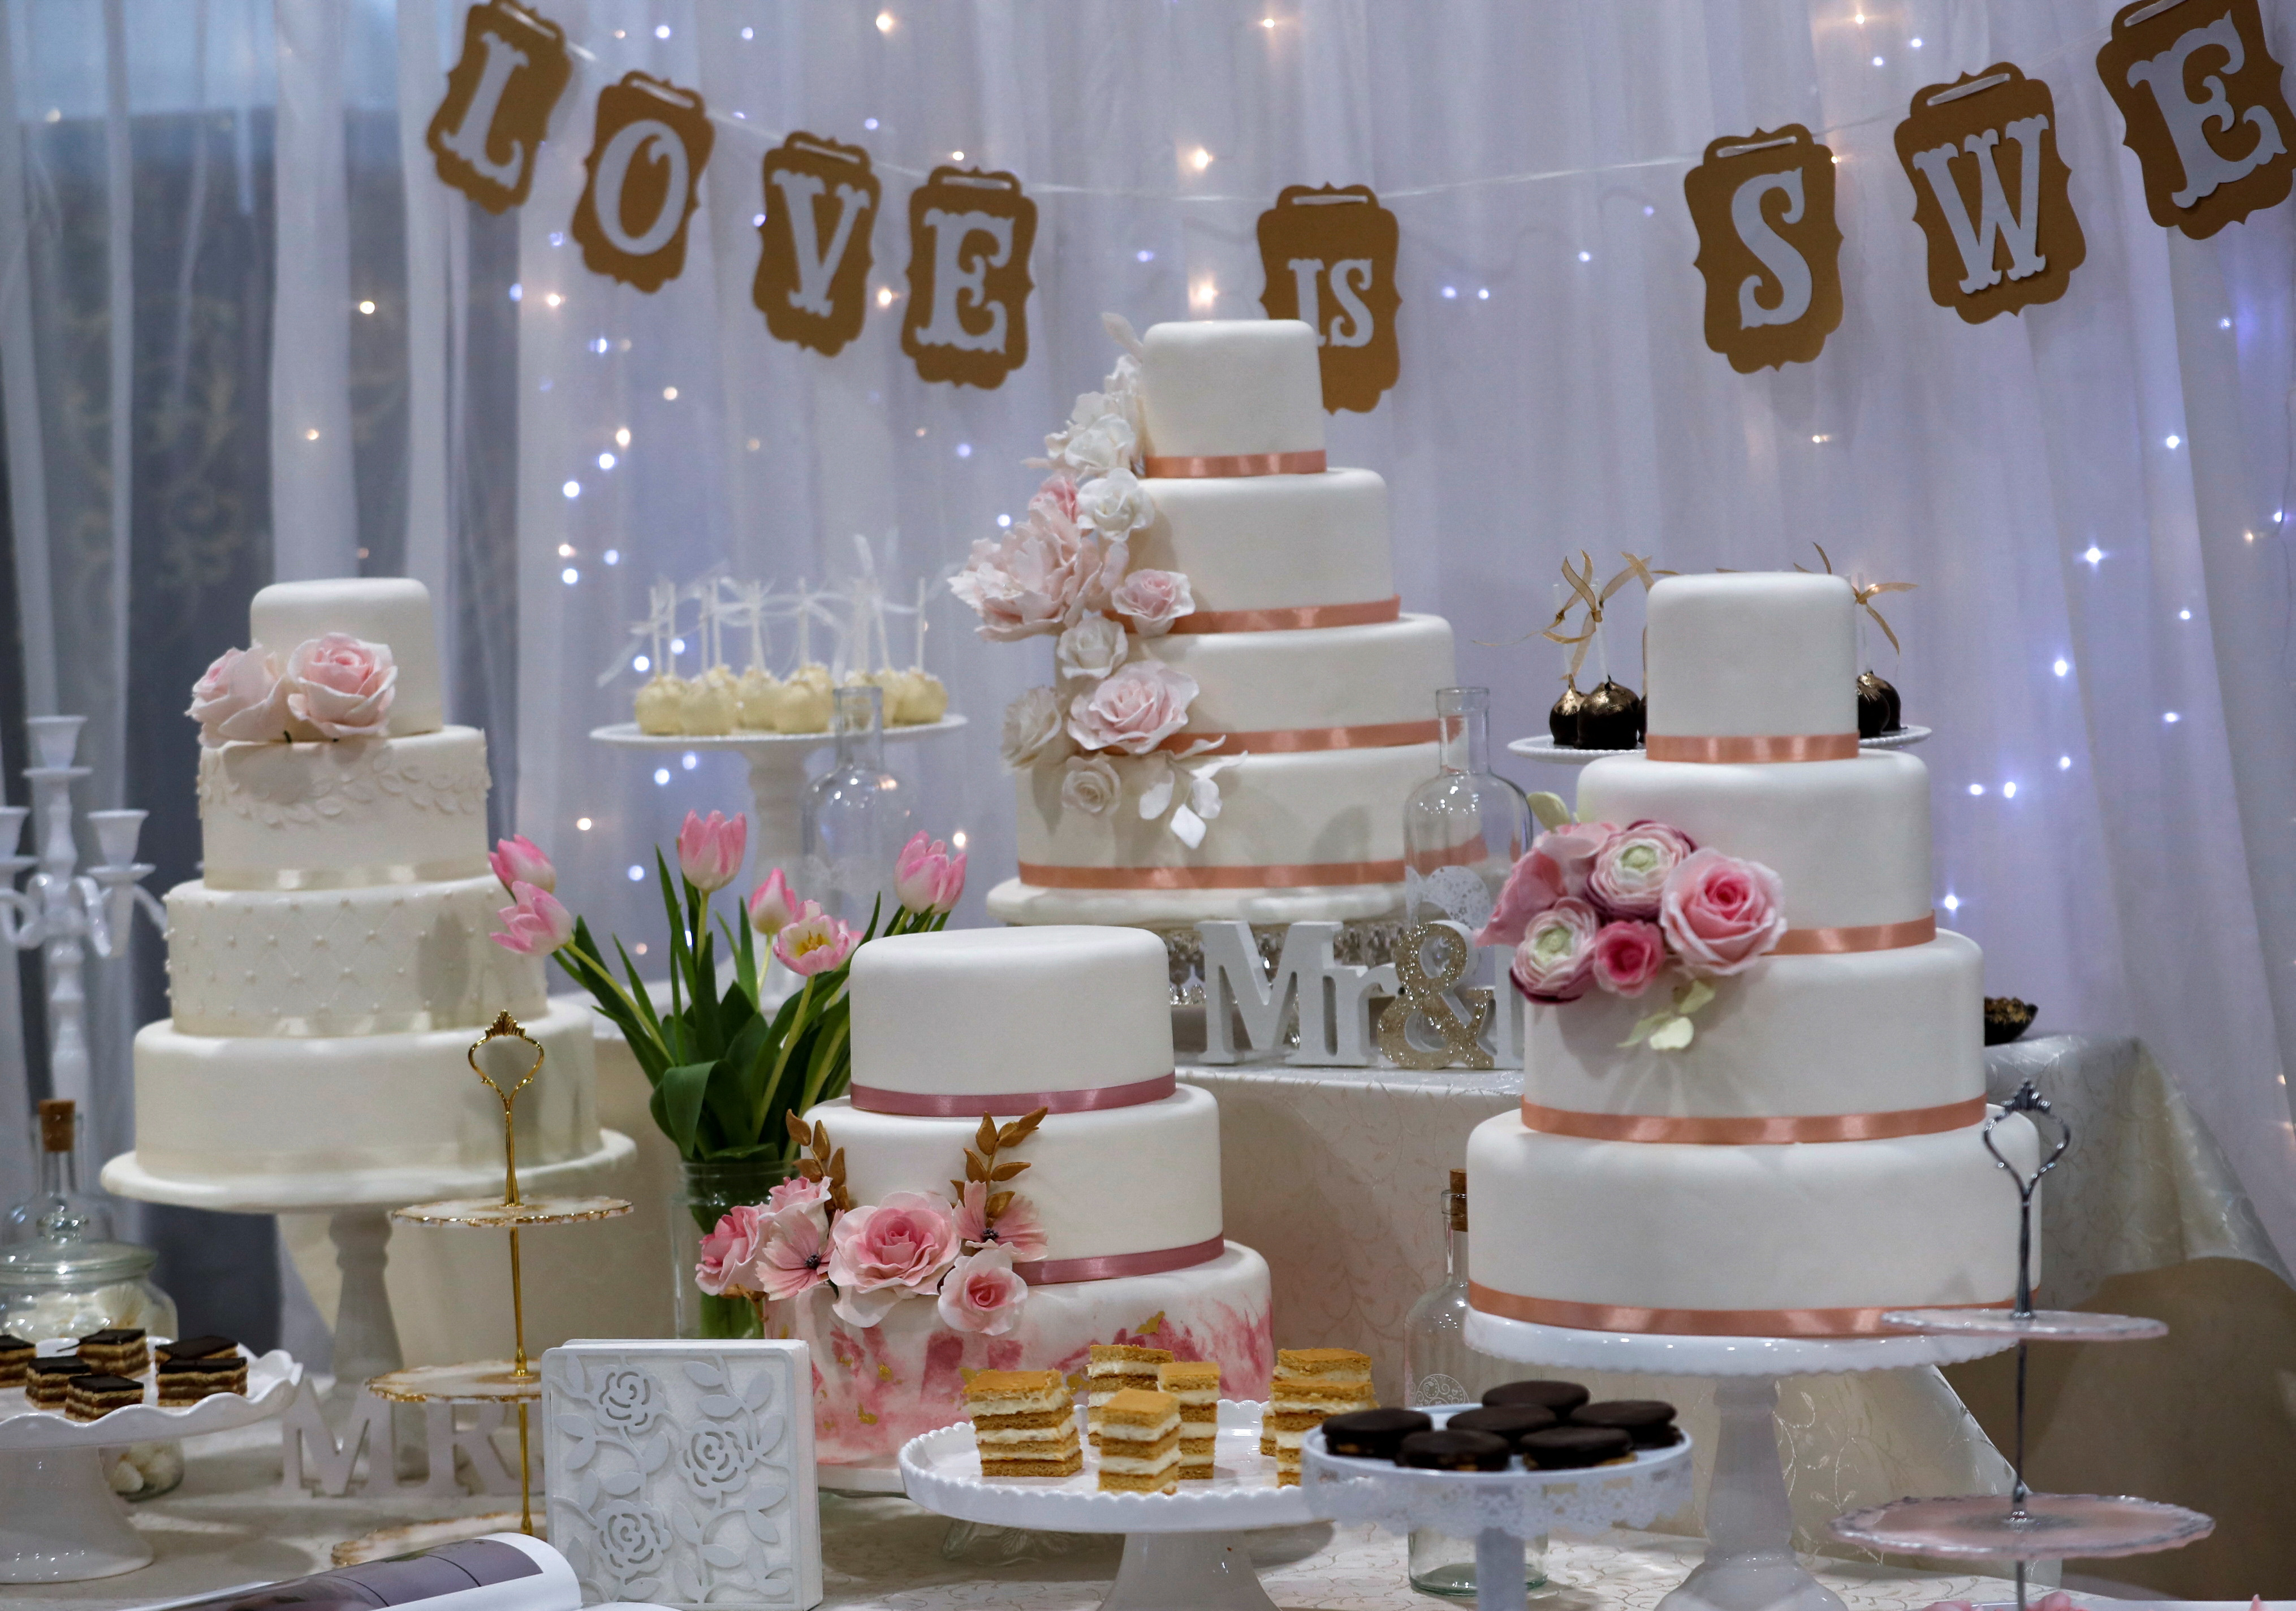 Wedding cakes are displayed during the Central European Wedding Show in Budapest